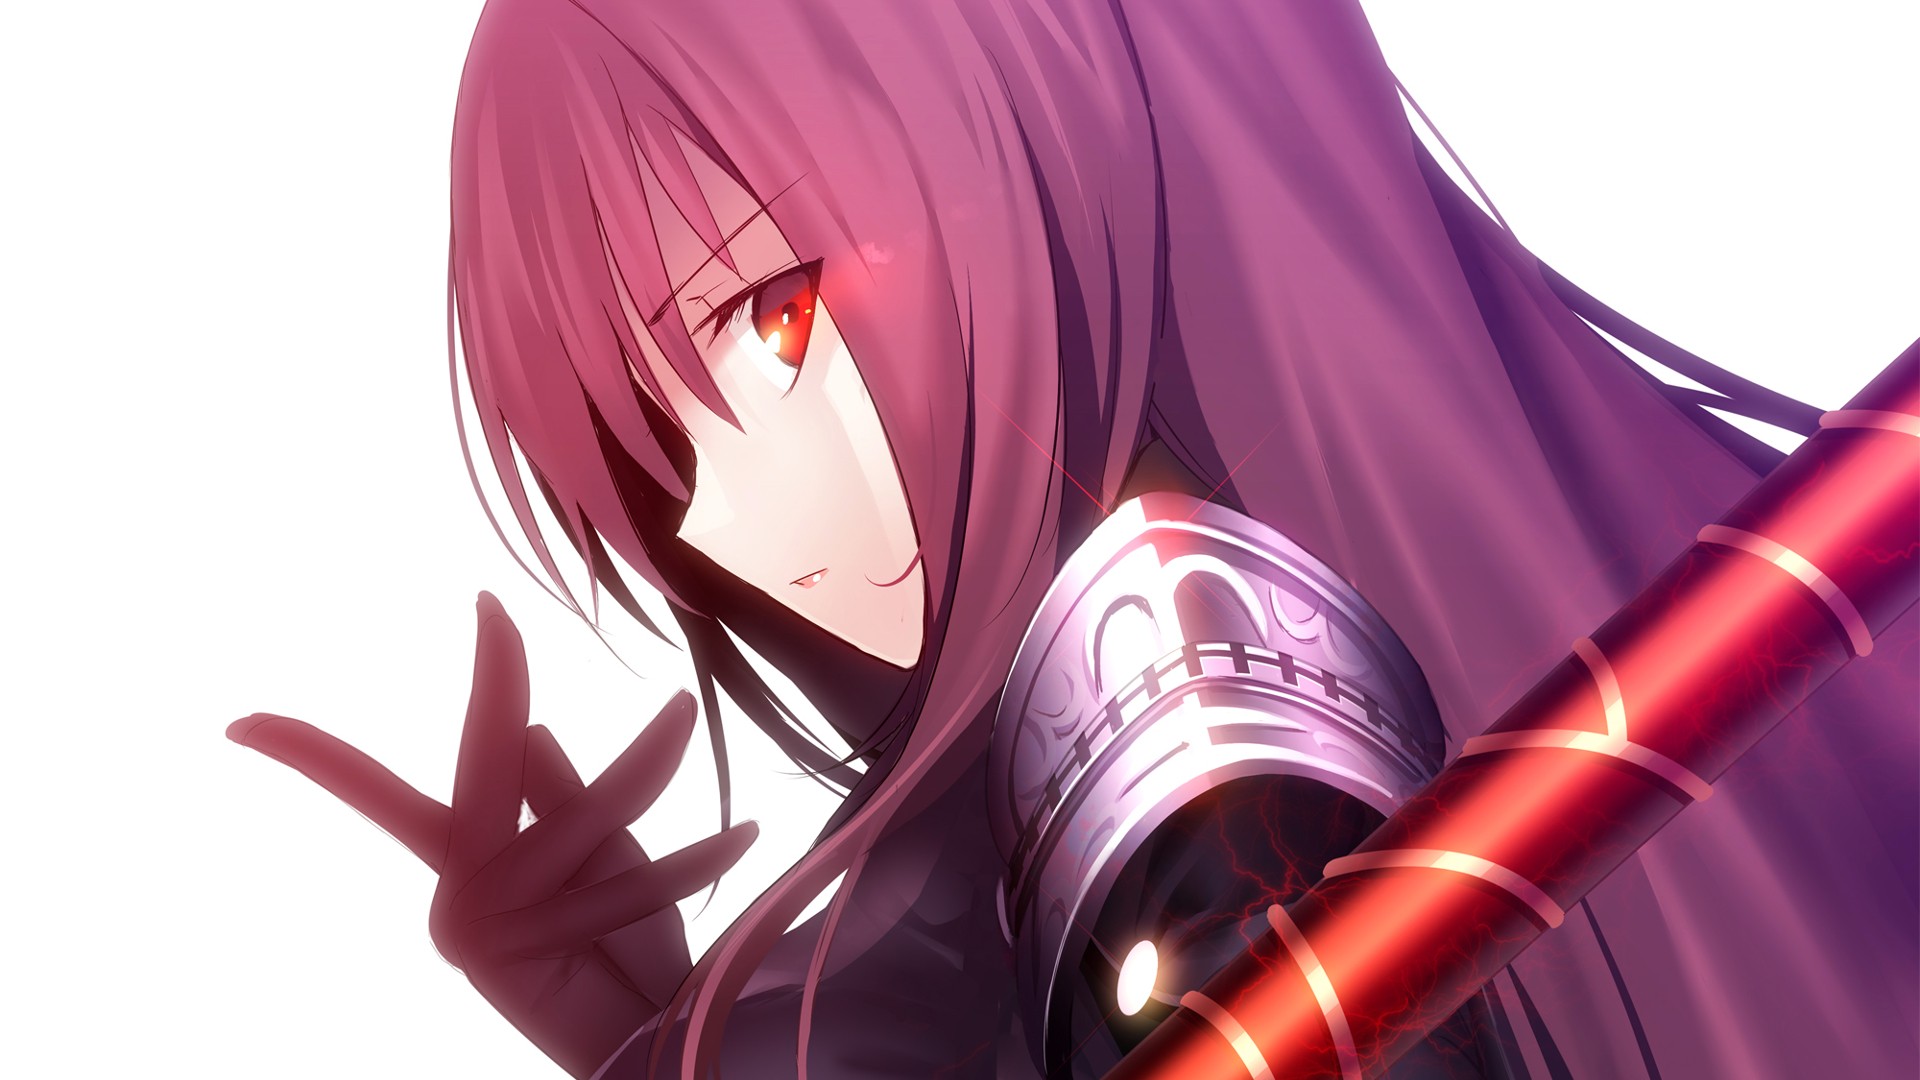 Anime 1920x1080 anime anime girls Fate/Grand Order Scathach purple hair red eyes white background simple background fantasy art women fantasy girl